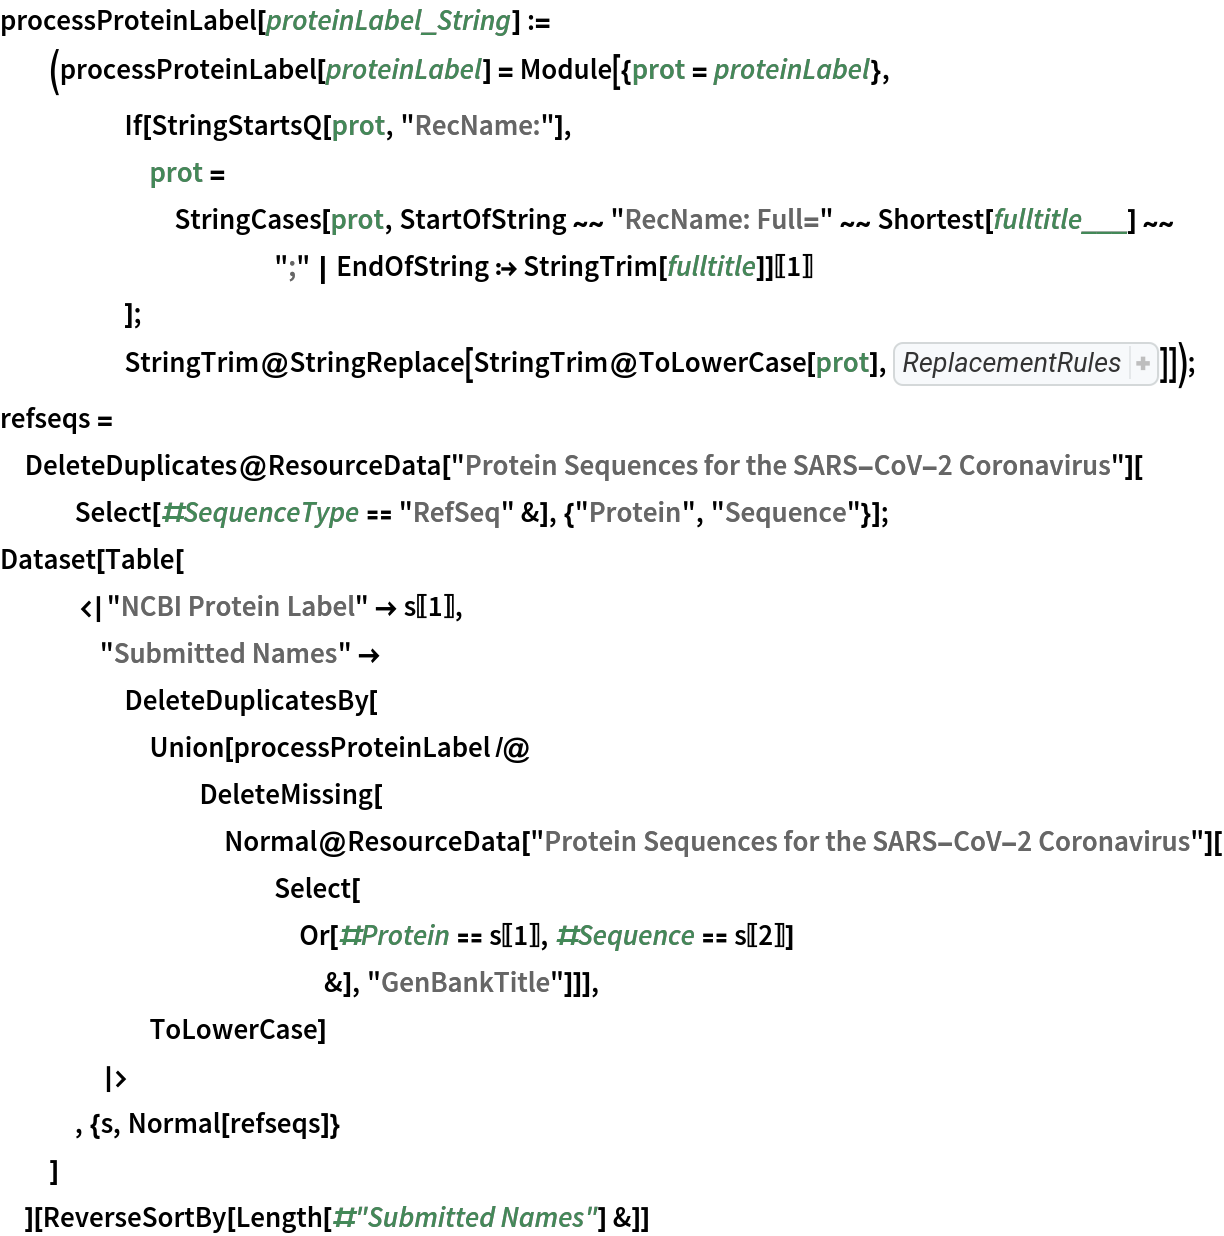 processProteinLabel[
   proteinLabel_String] := (processProteinLabel[proteinLabel] = Module[{prot = proteinLabel},
     If[StringStartsQ[prot, "RecName:"],
      prot = StringCases[prot, StartOfString ~~ "RecName: Full=" ~~ Shortest[fulltitle___] ~~
            ";" | EndOfString :> StringTrim[fulltitle]][[1]]
      ];
     StringTrim@
      StringReplace[StringTrim@ToLowerCase[prot], {
       "membrance" -> "membrane", "2019-ncov s2 subunit,2019-ncov s2 subunit" -> "2019-ncov s2 subunit", "proteiin" -> "protein", ", partial" -> "", StringExpression["[", 
BlankNullSequence[], "]"] -> "", "-" -> "", "," -> "", StringExpression[WordBoundary, "protein", WordBoundary] -> "",
         "partial" -> "", StringExpression[
         "chain ", WordCharacter, WordBoundary] -> ""}]]);
refseqs = DeleteDuplicates@
  ResourceData["Protein Sequences for the SARS-CoV-2 Coronavirus"][
   Select[#SequenceType == "RefSeq" &], {"Protein", "Sequence"}]; 
Dataset[Table[
   <|"NCBI Protein Label" -> s[[1]], "Submitted Names" -> DeleteDuplicatesBy[
      Union[processProteinLabel /@ DeleteMissing[
         Normal@ResourceData[
            "Protein Sequences for the SARS-CoV-2 Coronavirus"][Select[
            Or[#Protein == s[[1]], #Sequence == s[[2]]]
             &], "GenBankTitle"]]],
      ToLowerCase]
    |>
   , {s, Normal[refseqs]}
   ]
  ][ReverseSortBy[Length[#"Submitted Names"] &]]